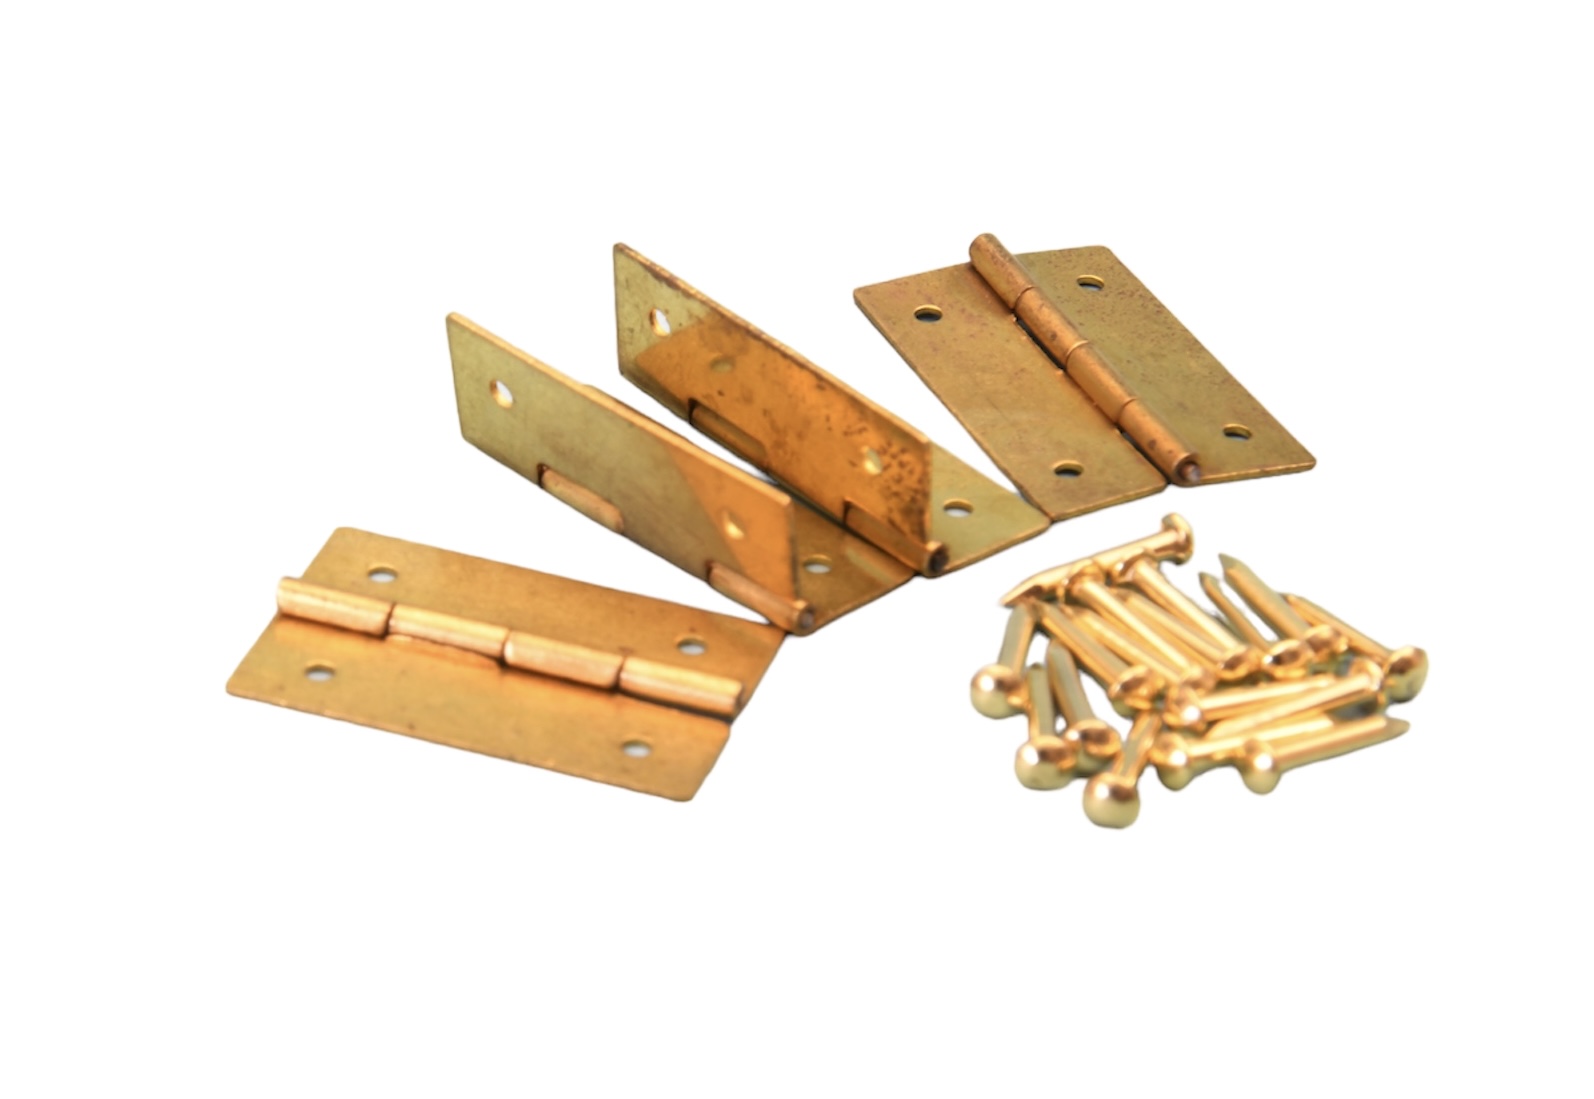 A30043 4 x 25mm hinges with pins